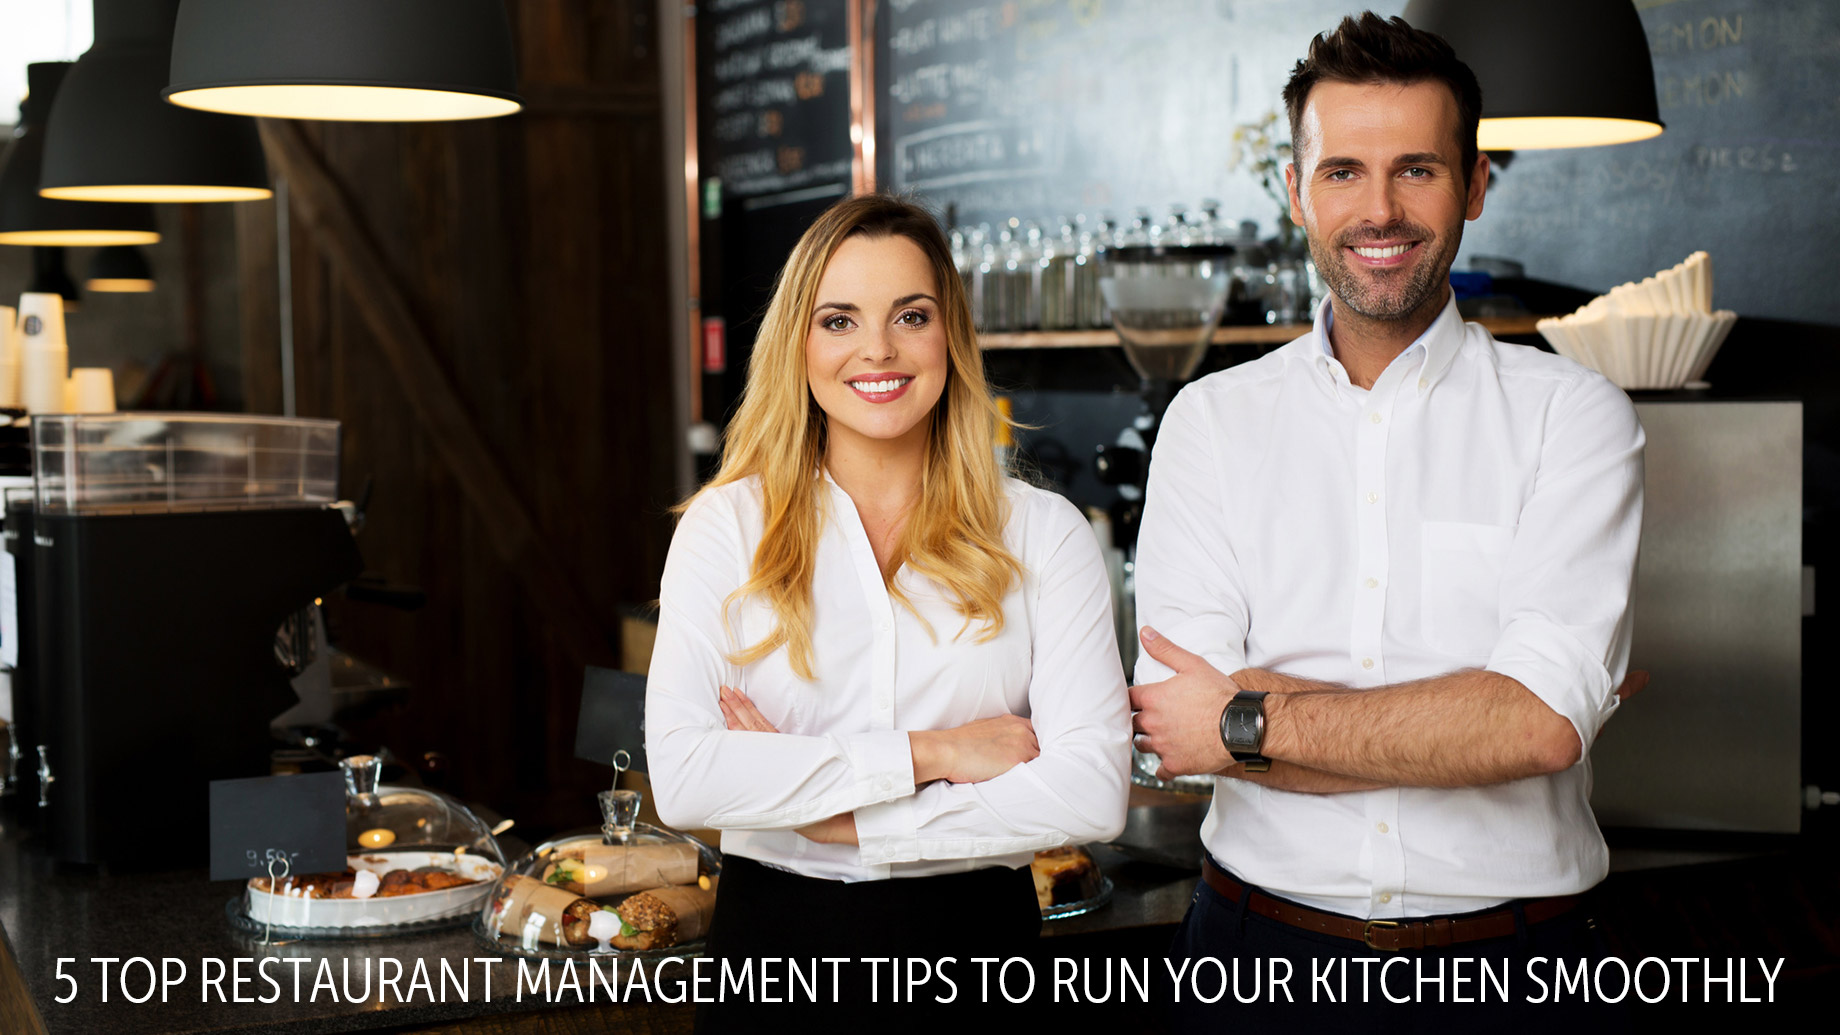 5 Top Restaurant Management Tips to Run Your Kitchen Smoothly